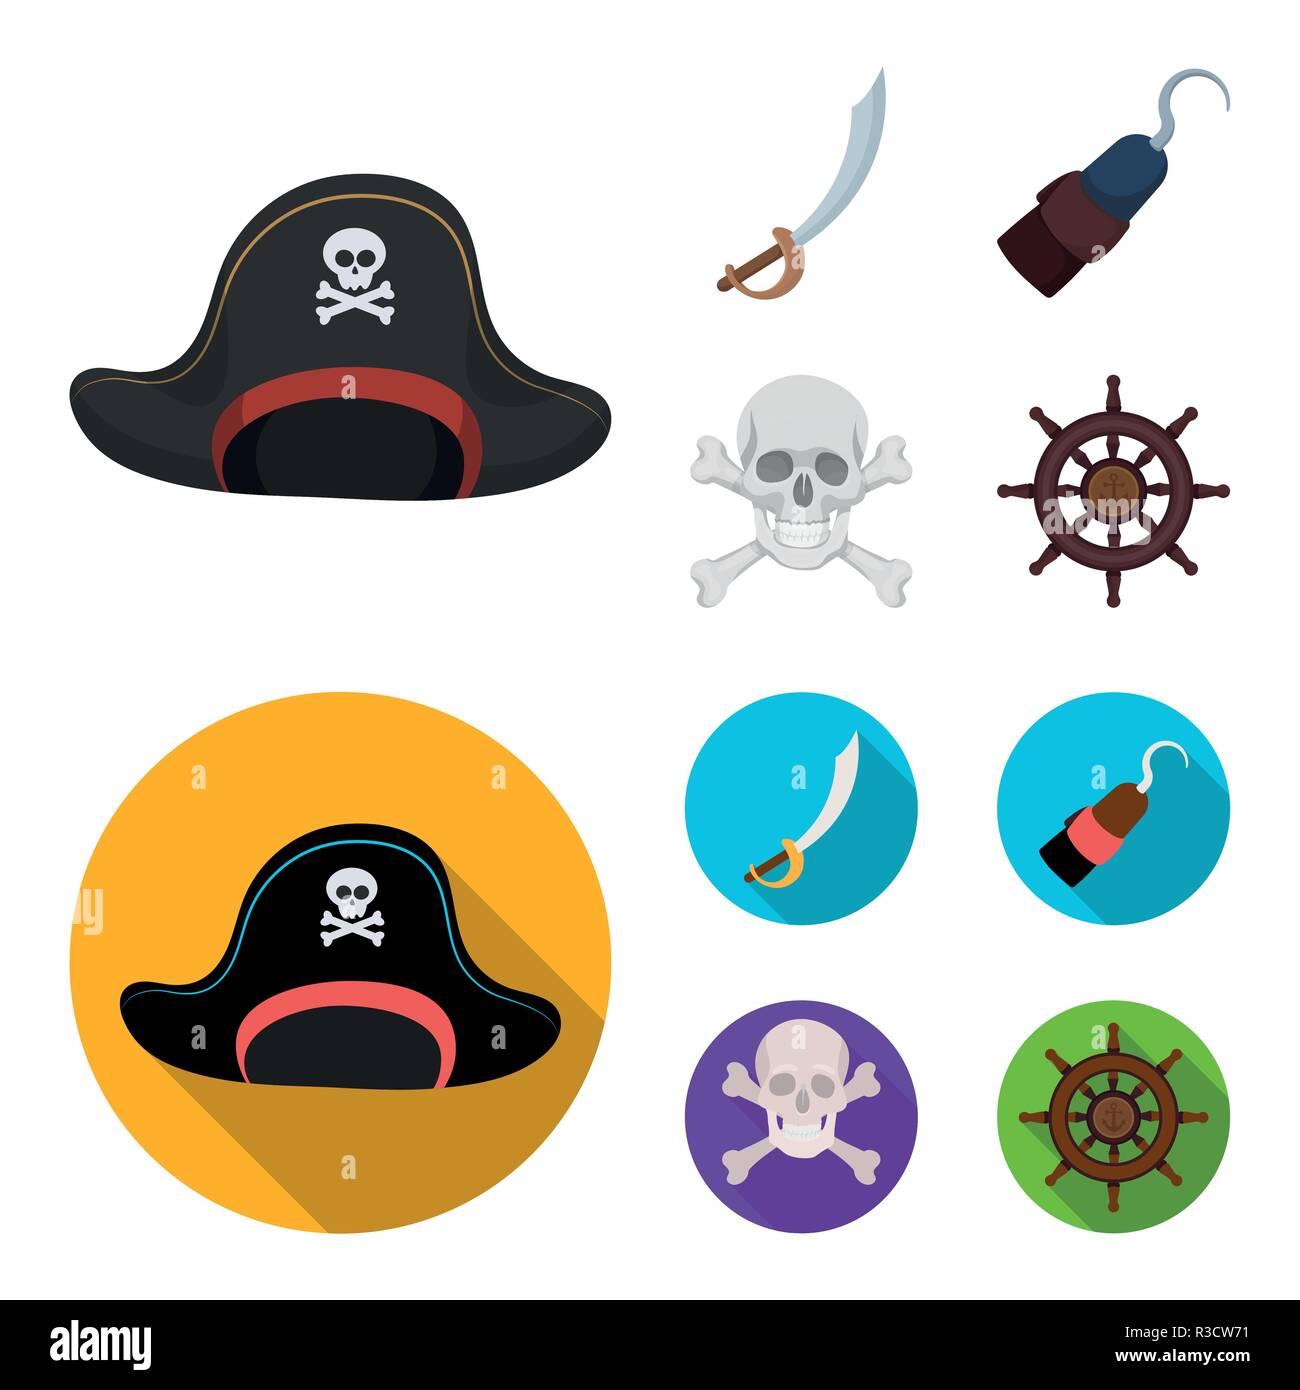 Pirate, bandit, cap, hook .Pirates set collection icons in cartoon